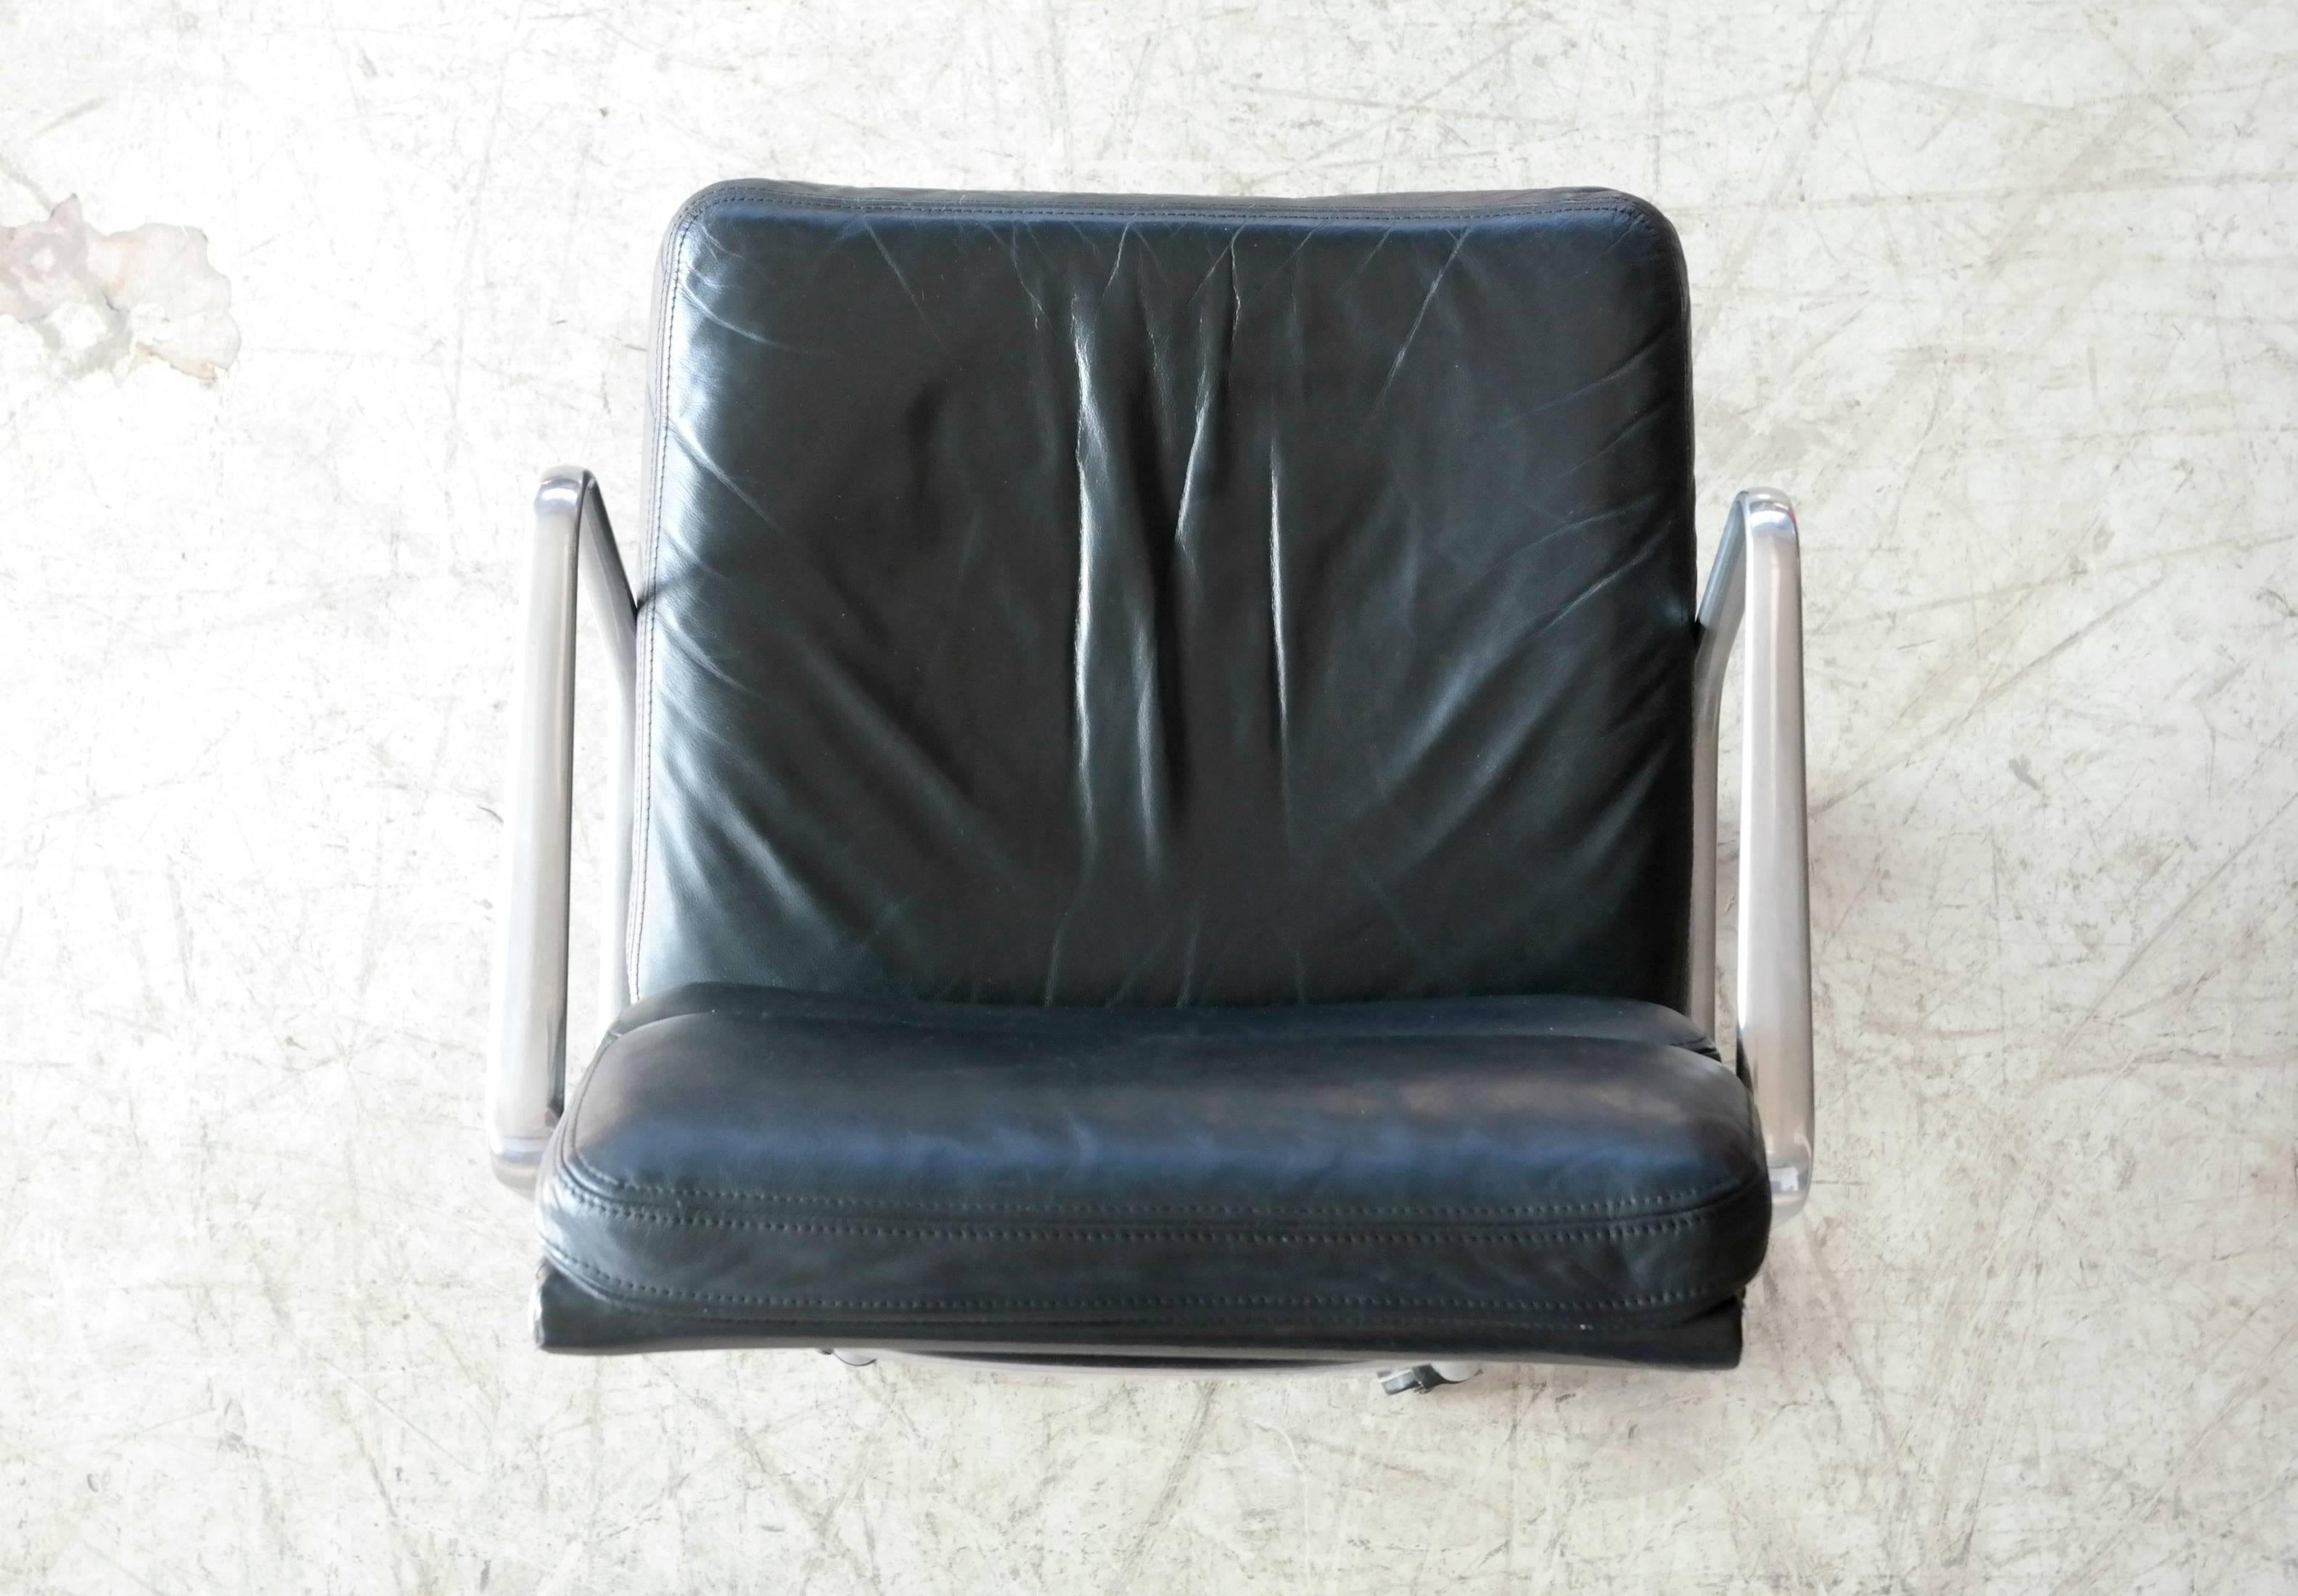 Aluminum Eames Soft Pad Management Chair Model Ea434 European Issue with Caster Wheels